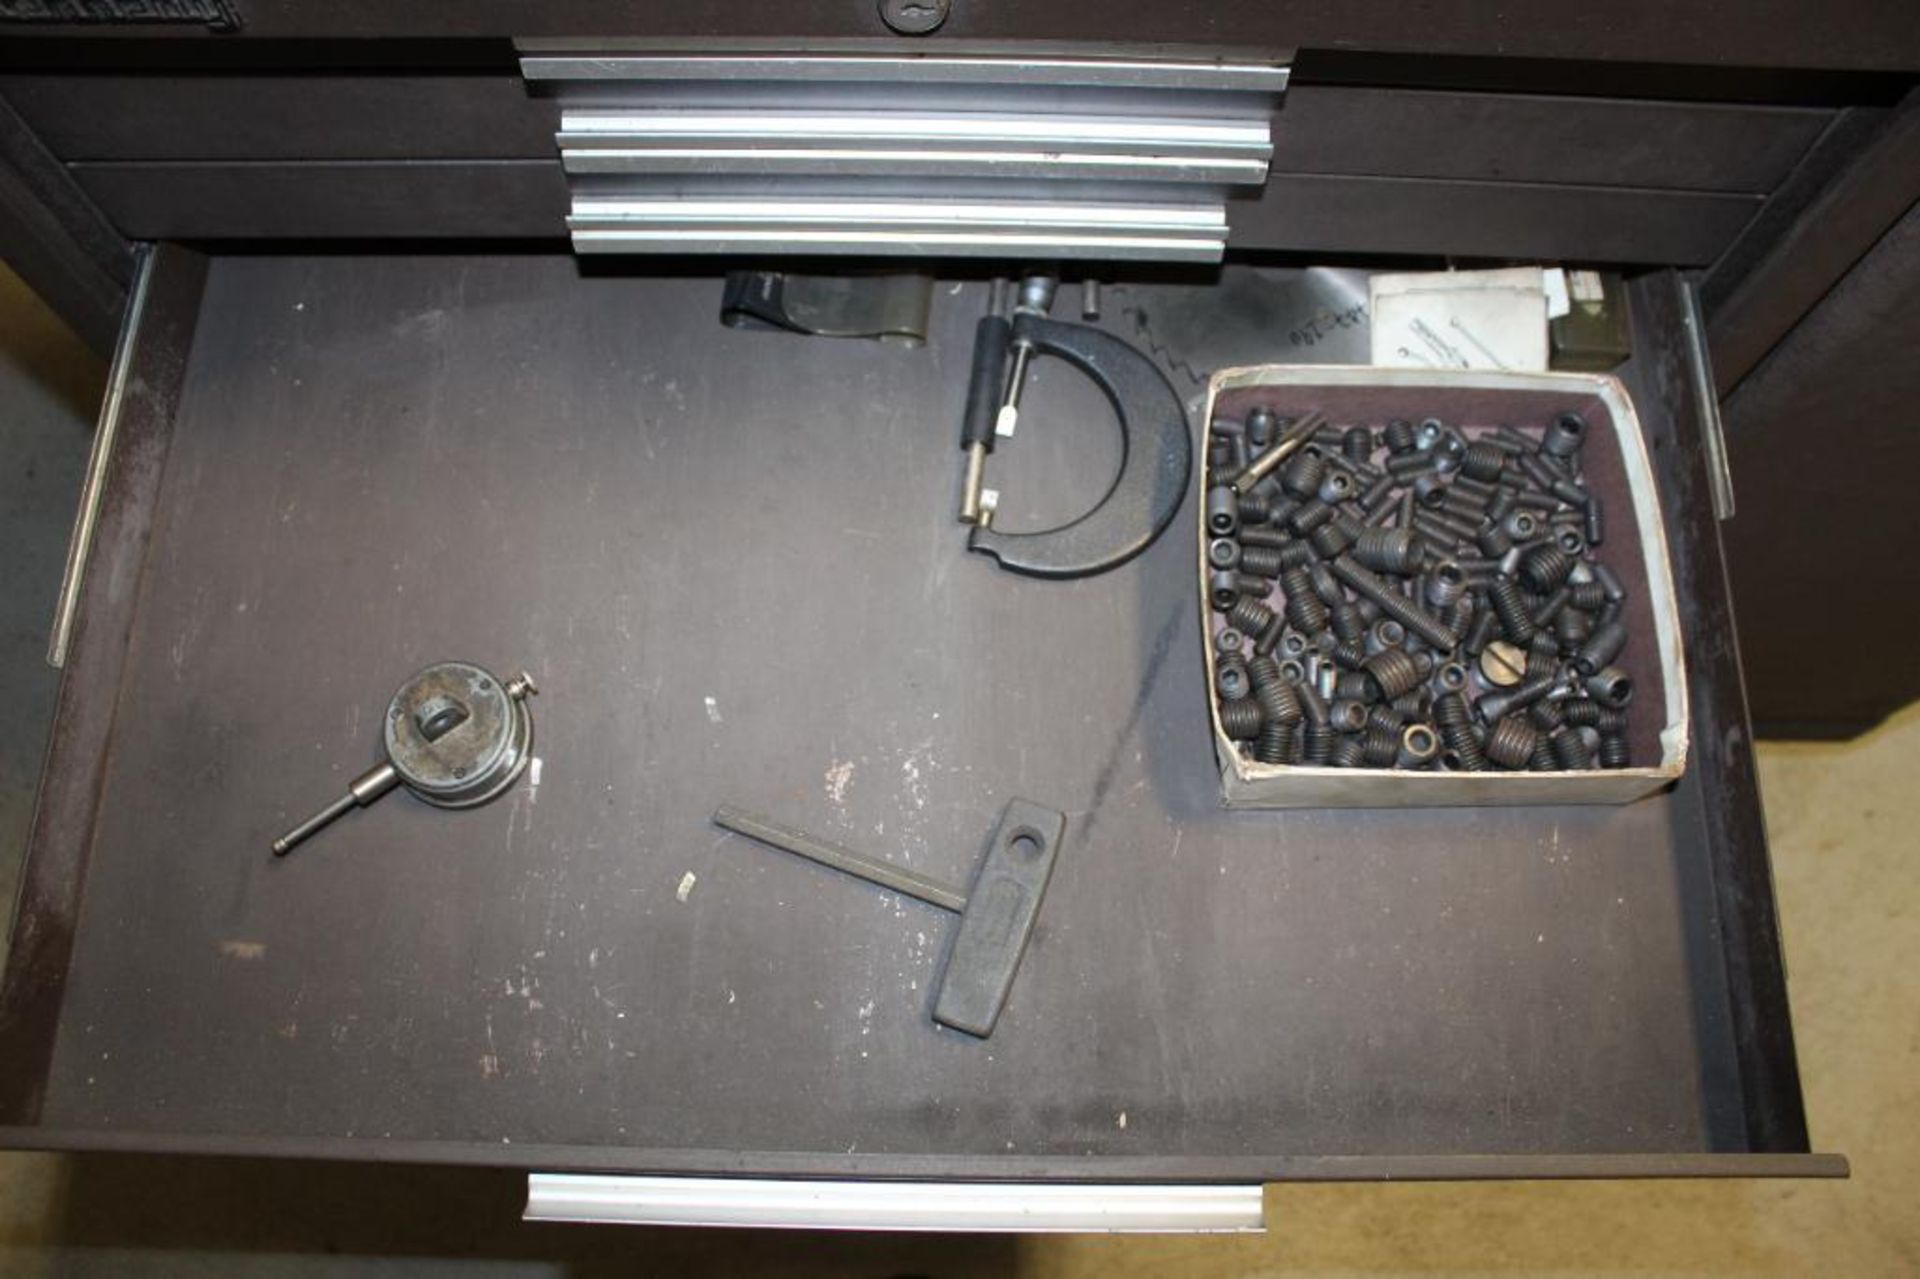 Kennedy Toolbox, Includes Contents - Milling Bits, Taps, Drill Bits - Image 7 of 7